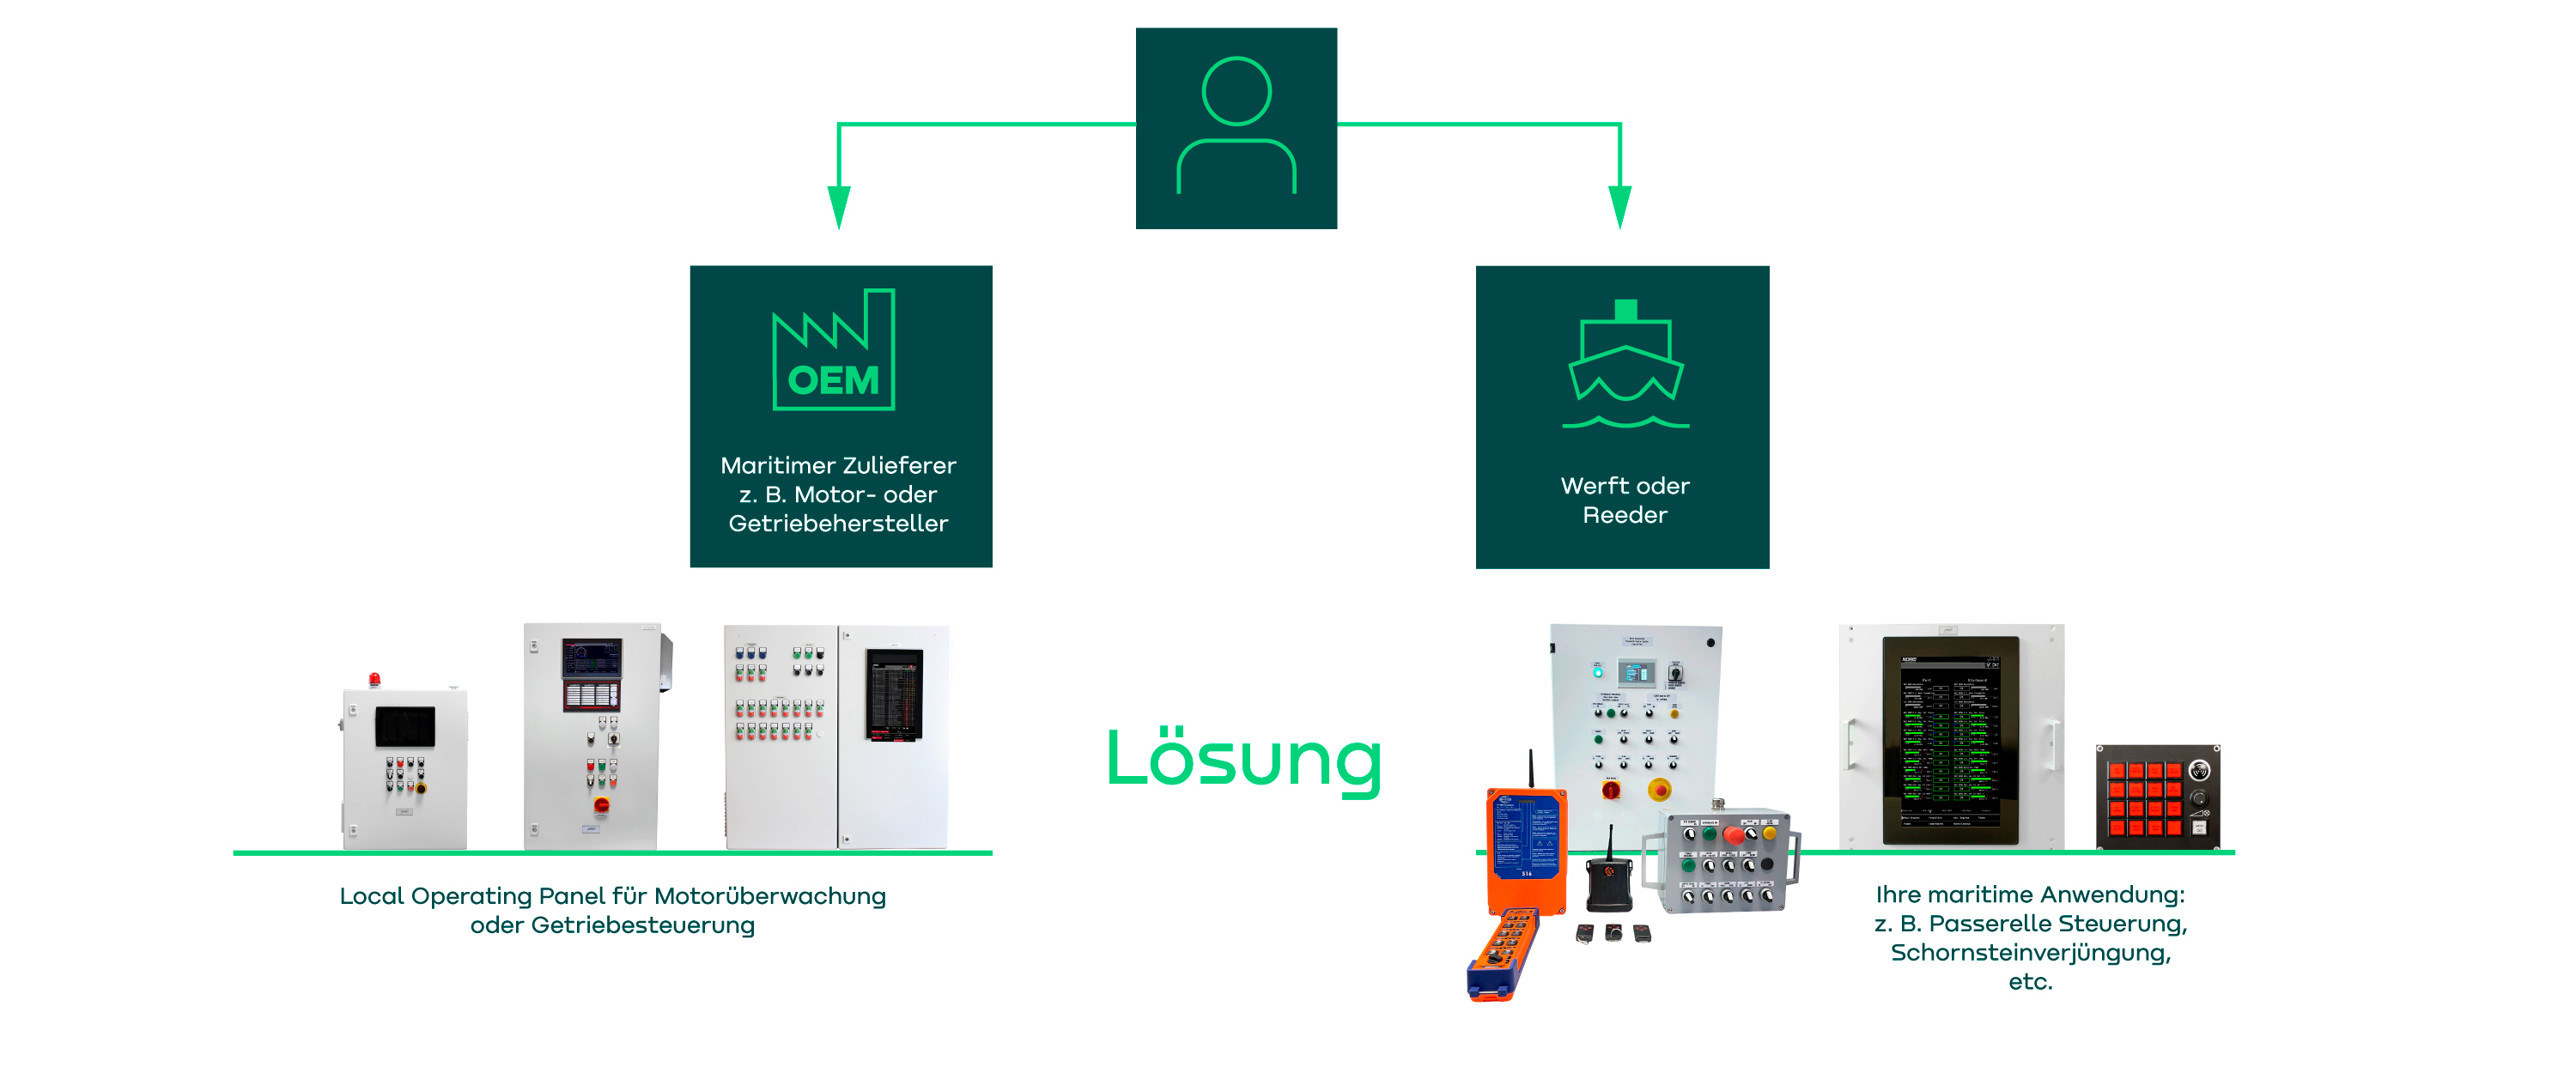 The image shows a Scheme of automation solutions